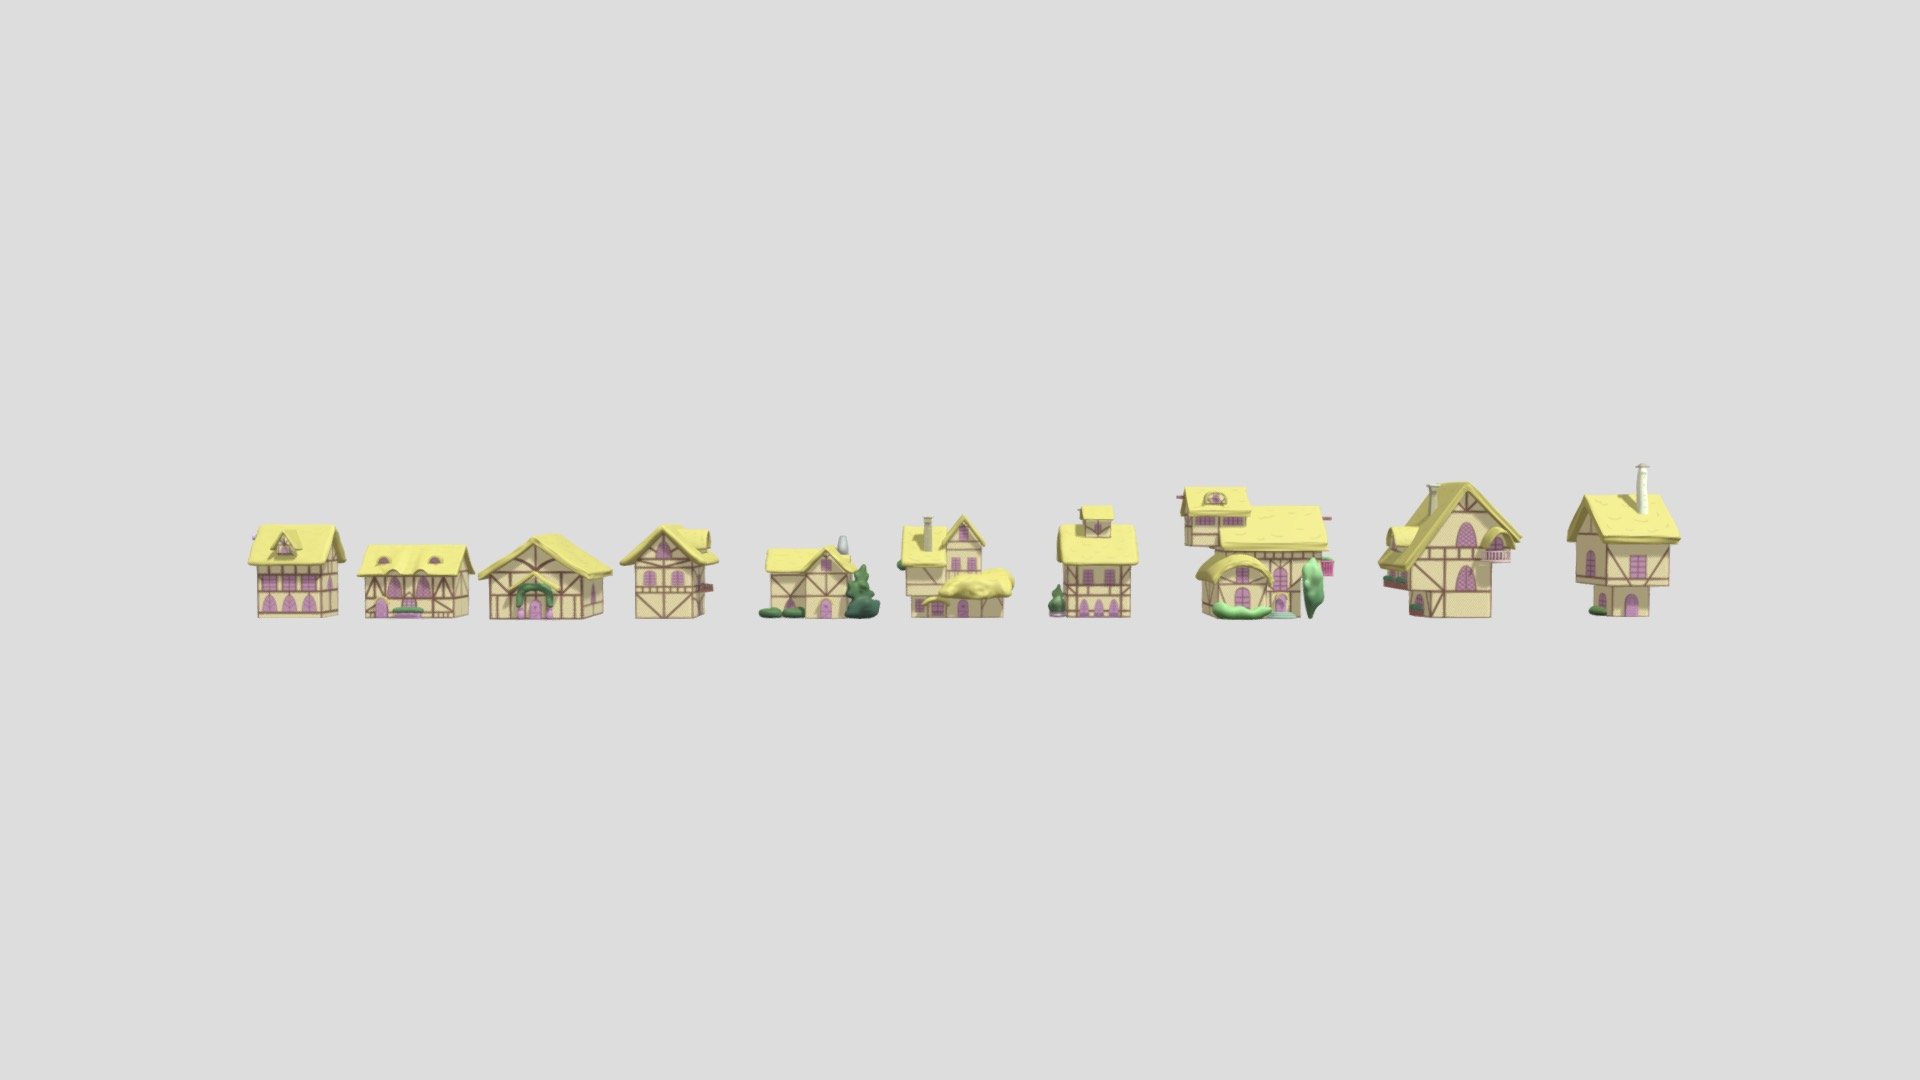 10 Toon Pony Houses.

Textures: 1024 × 1024, Multiple colors on texture.

Has Normal Map: 1024 × 1024.

UV map included: 1024 × 1024.

10 Textures. 

Materials: 1 - Toon House 1- 10

Smooth shaded.

Mirrored.

Subdivision Level: 1

Origin located on bottom-center.

Polygons: 422648 (Subdivision 0: 105698)

Vertices: 212142 (Subdivision 0: 53388)

Upon Request subdivision can be reduced to 0.

Formats: Fbx, Obj, Stl, Dae.

I hope you enjoy the model! - Toon Houses - Buy Royalty Free 3D model by Ed+ (@EDplus) 3d model